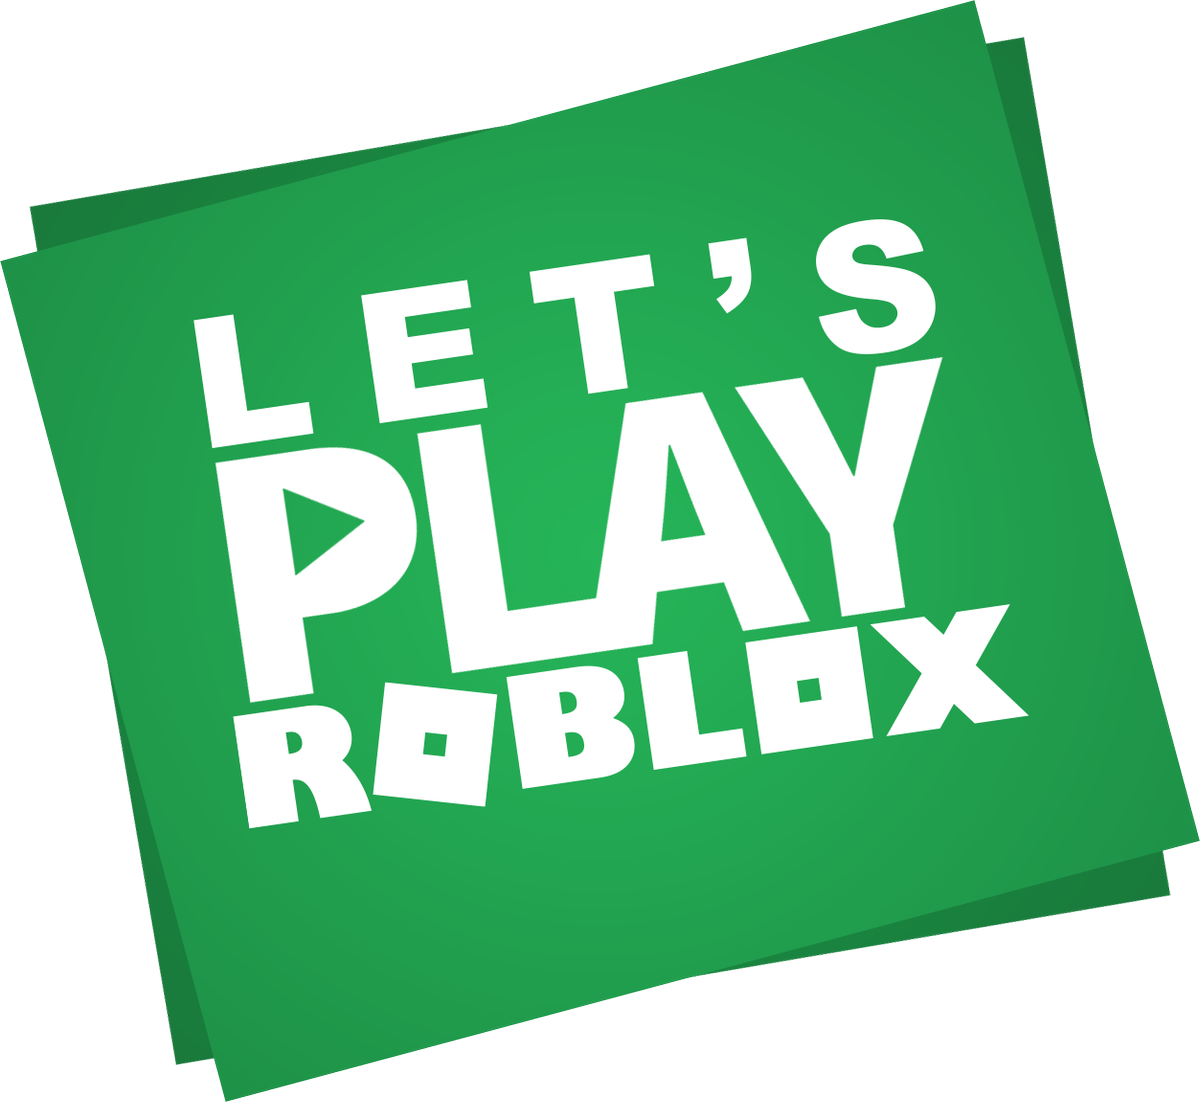 Roblox On Twitter Jump To The Future With Letsplayroblox As They Take A Time Machine To Play Sci Fi Games 2pm Pdt Https T Co 2ufmigudb1 Https T Co Ebnzulpnms - transparent jumping roblox player